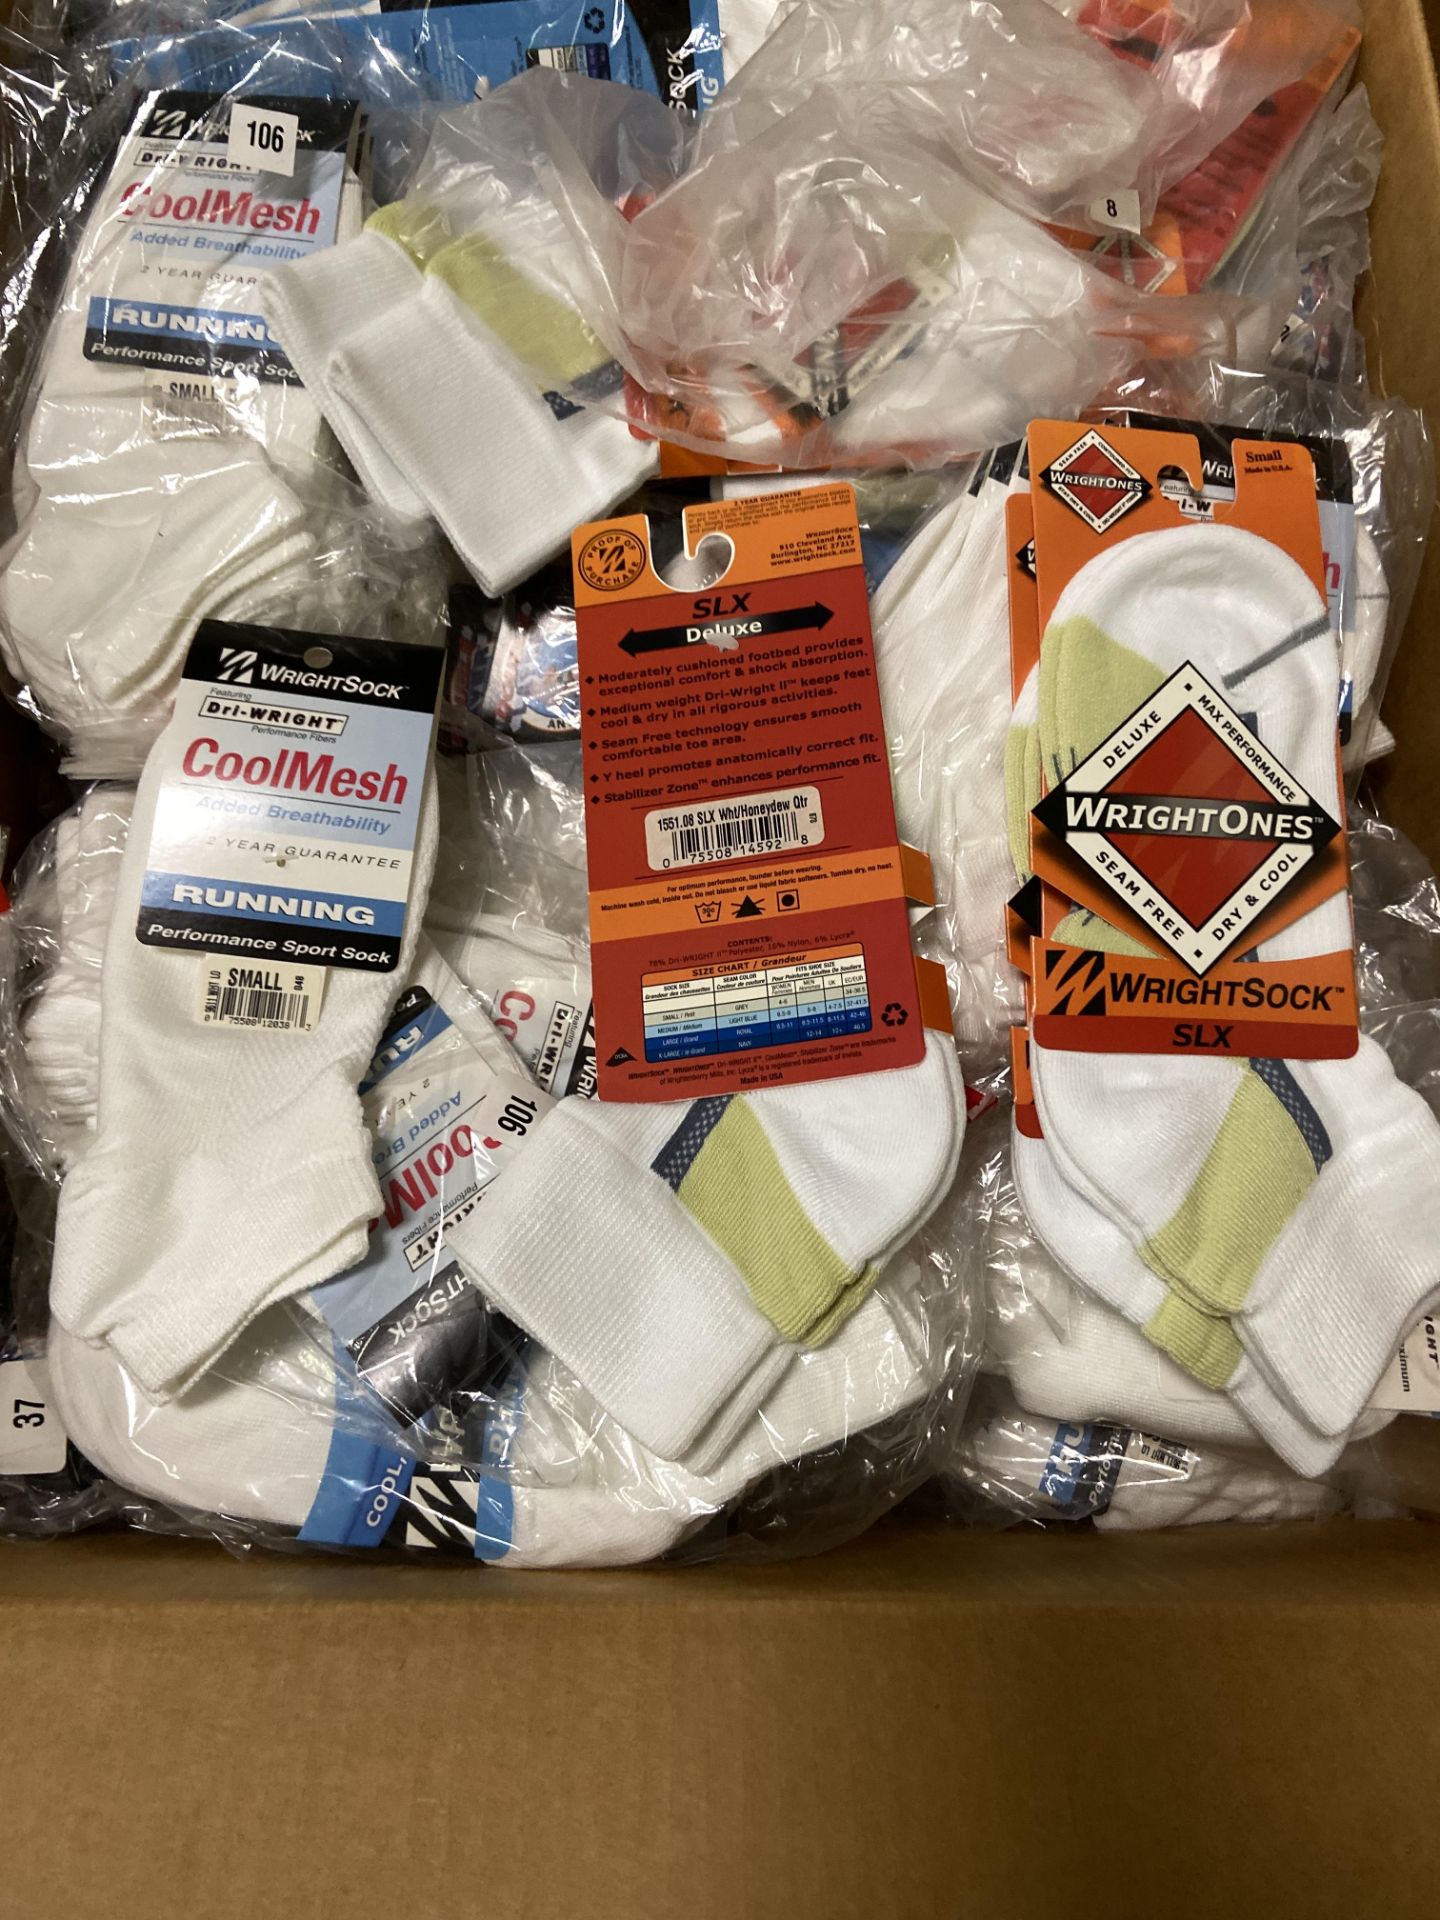 500+ packs of New Socks, Wrightsocks Various Styles, Various Colors and Styles - Image 4 of 6